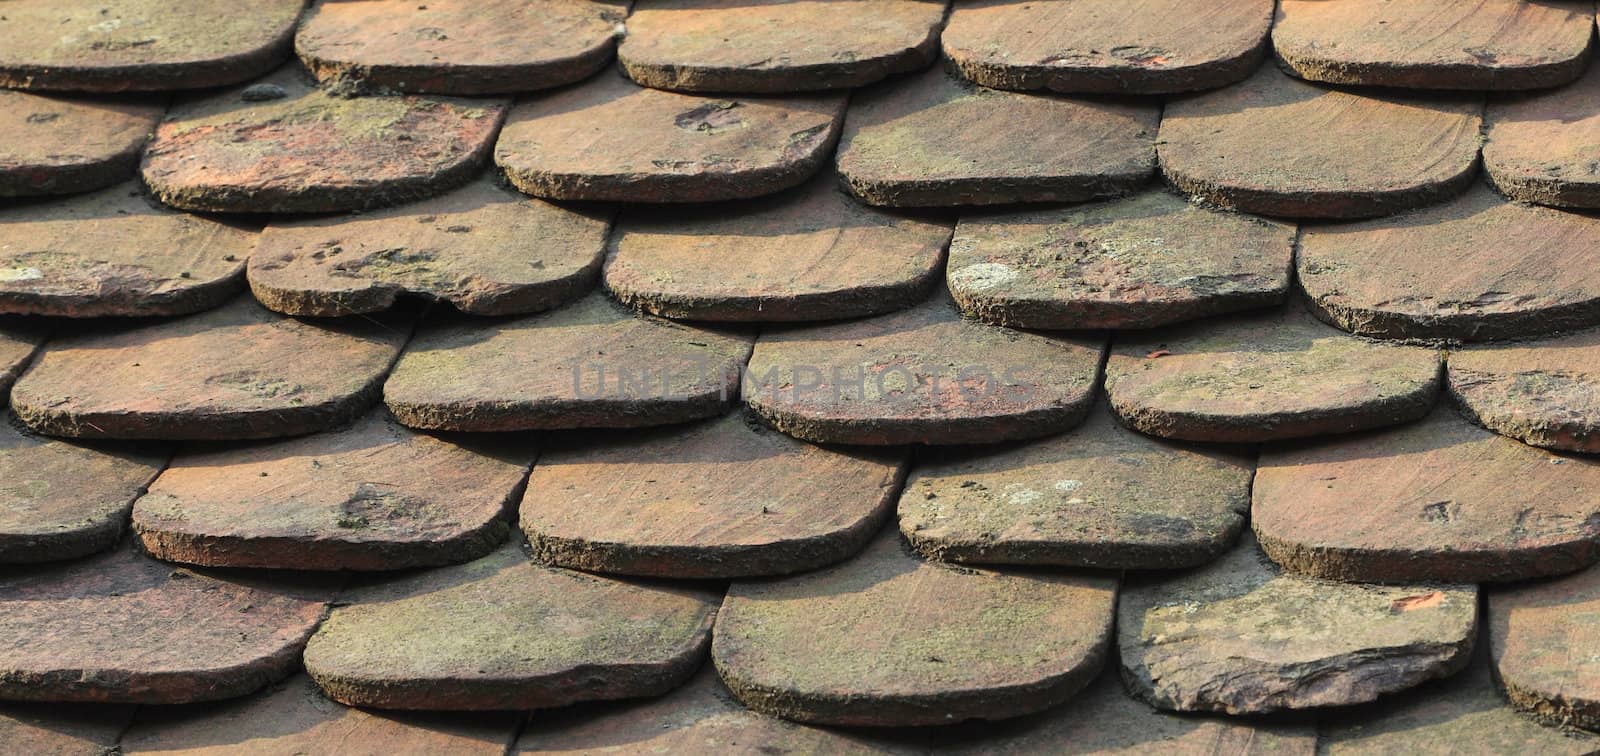 Close-up image of an old roof made of wooden tiles.
